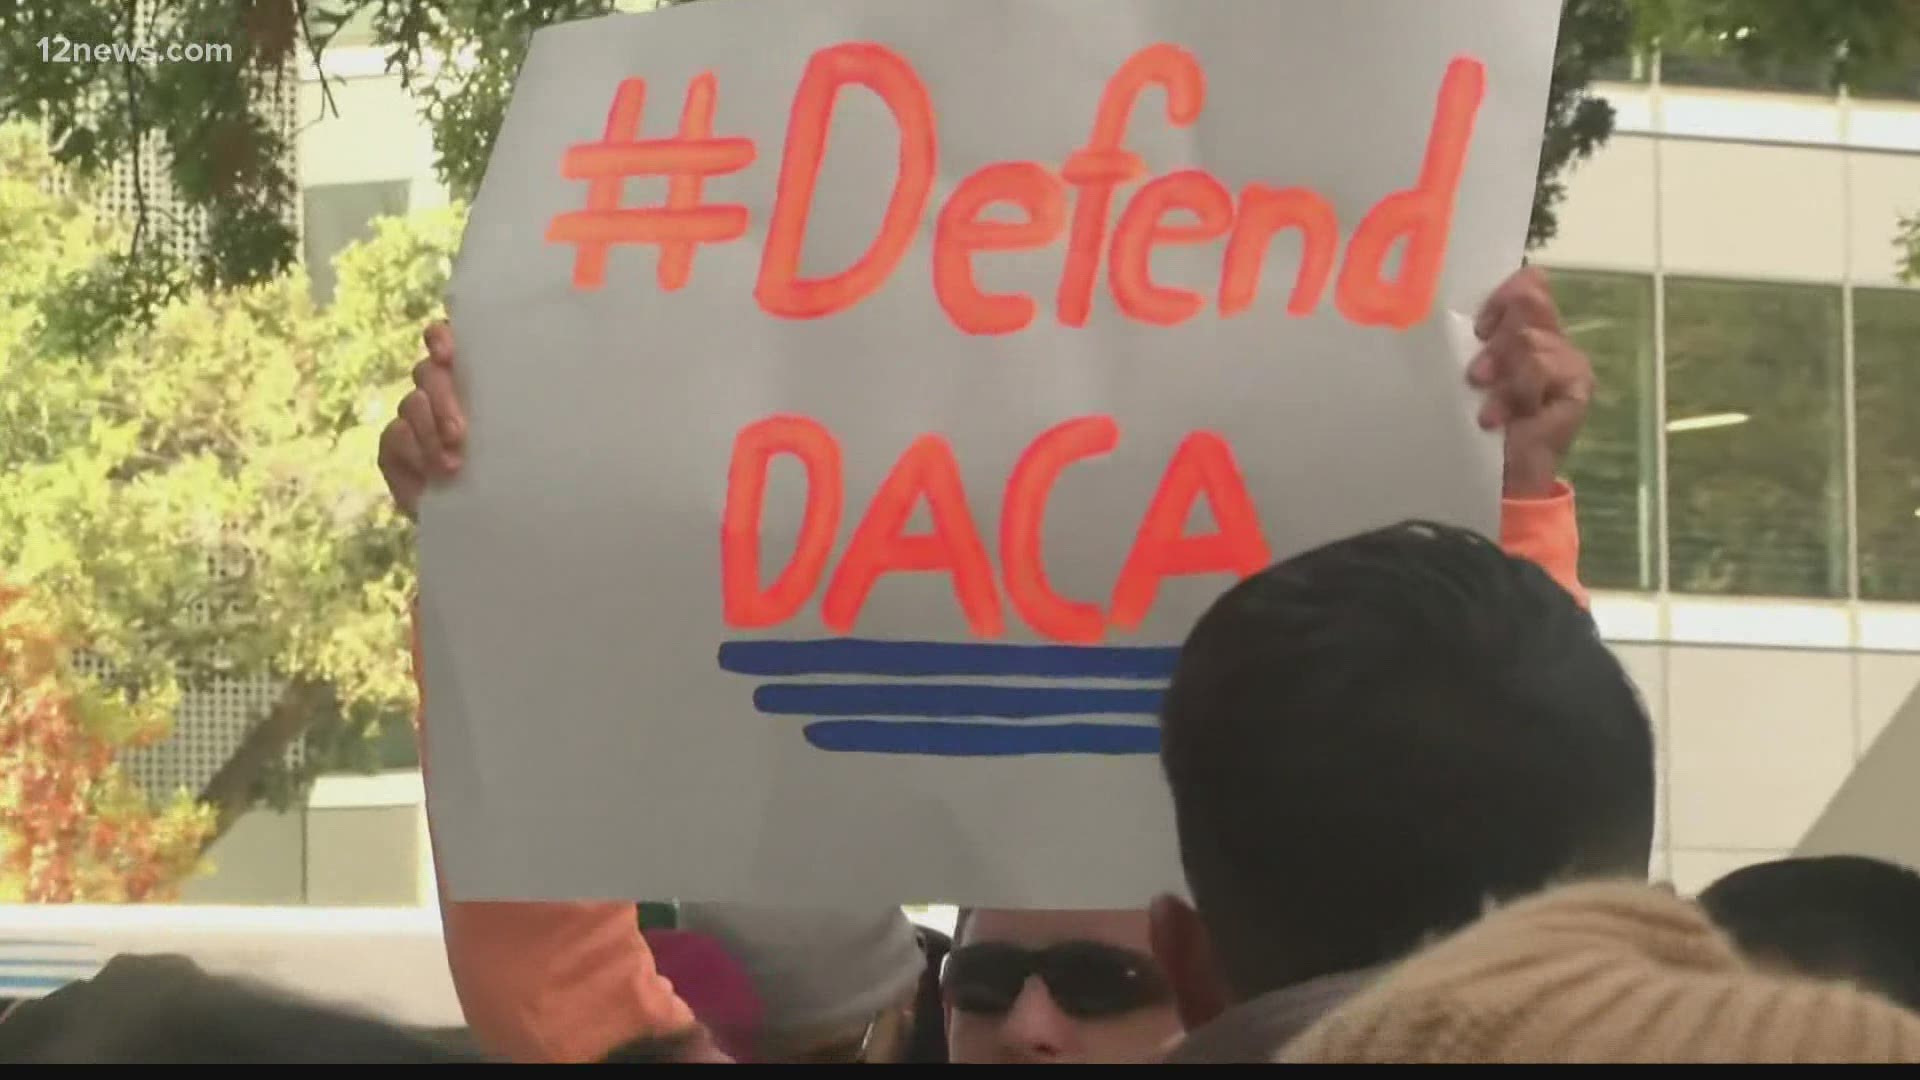 A federal judge in Texas recently ruled that the DACA program is illegal. The order has left some Arizona DACA recipients with uncertain futures.